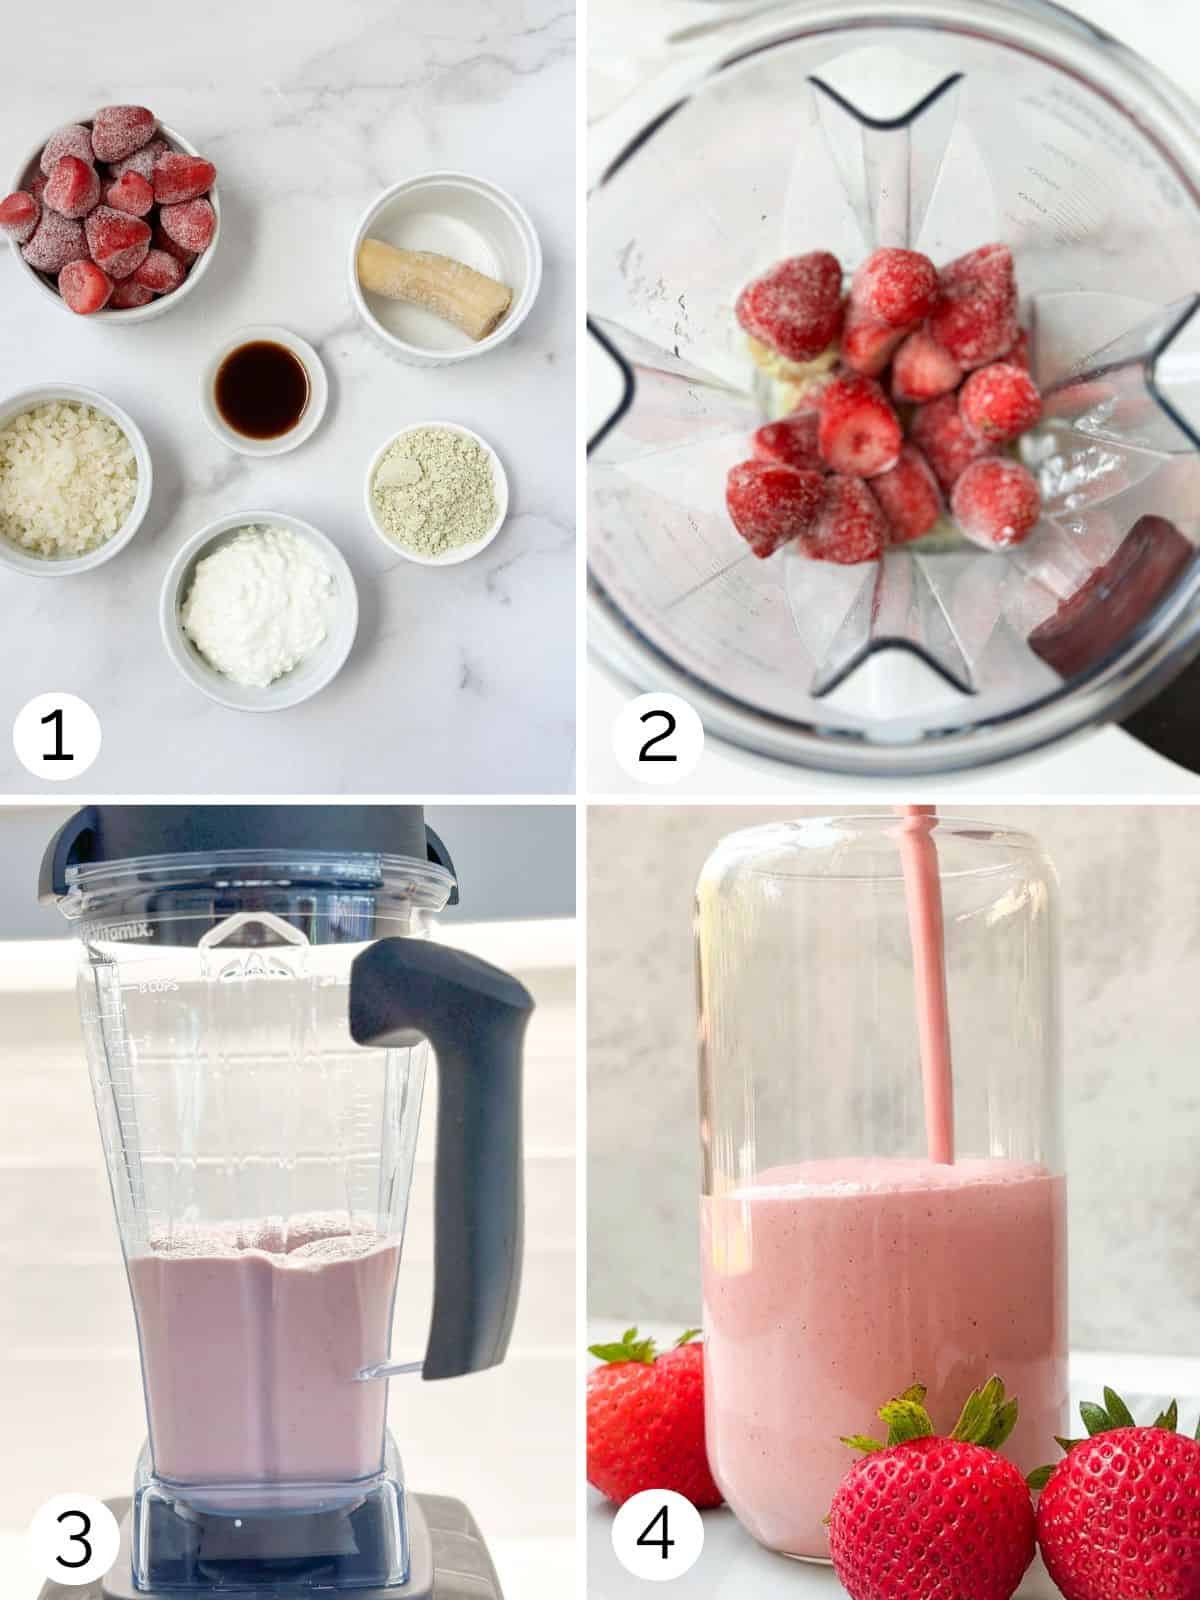 Process photos showing how to make a cottage cheese smoothie with strawberries in a blender.